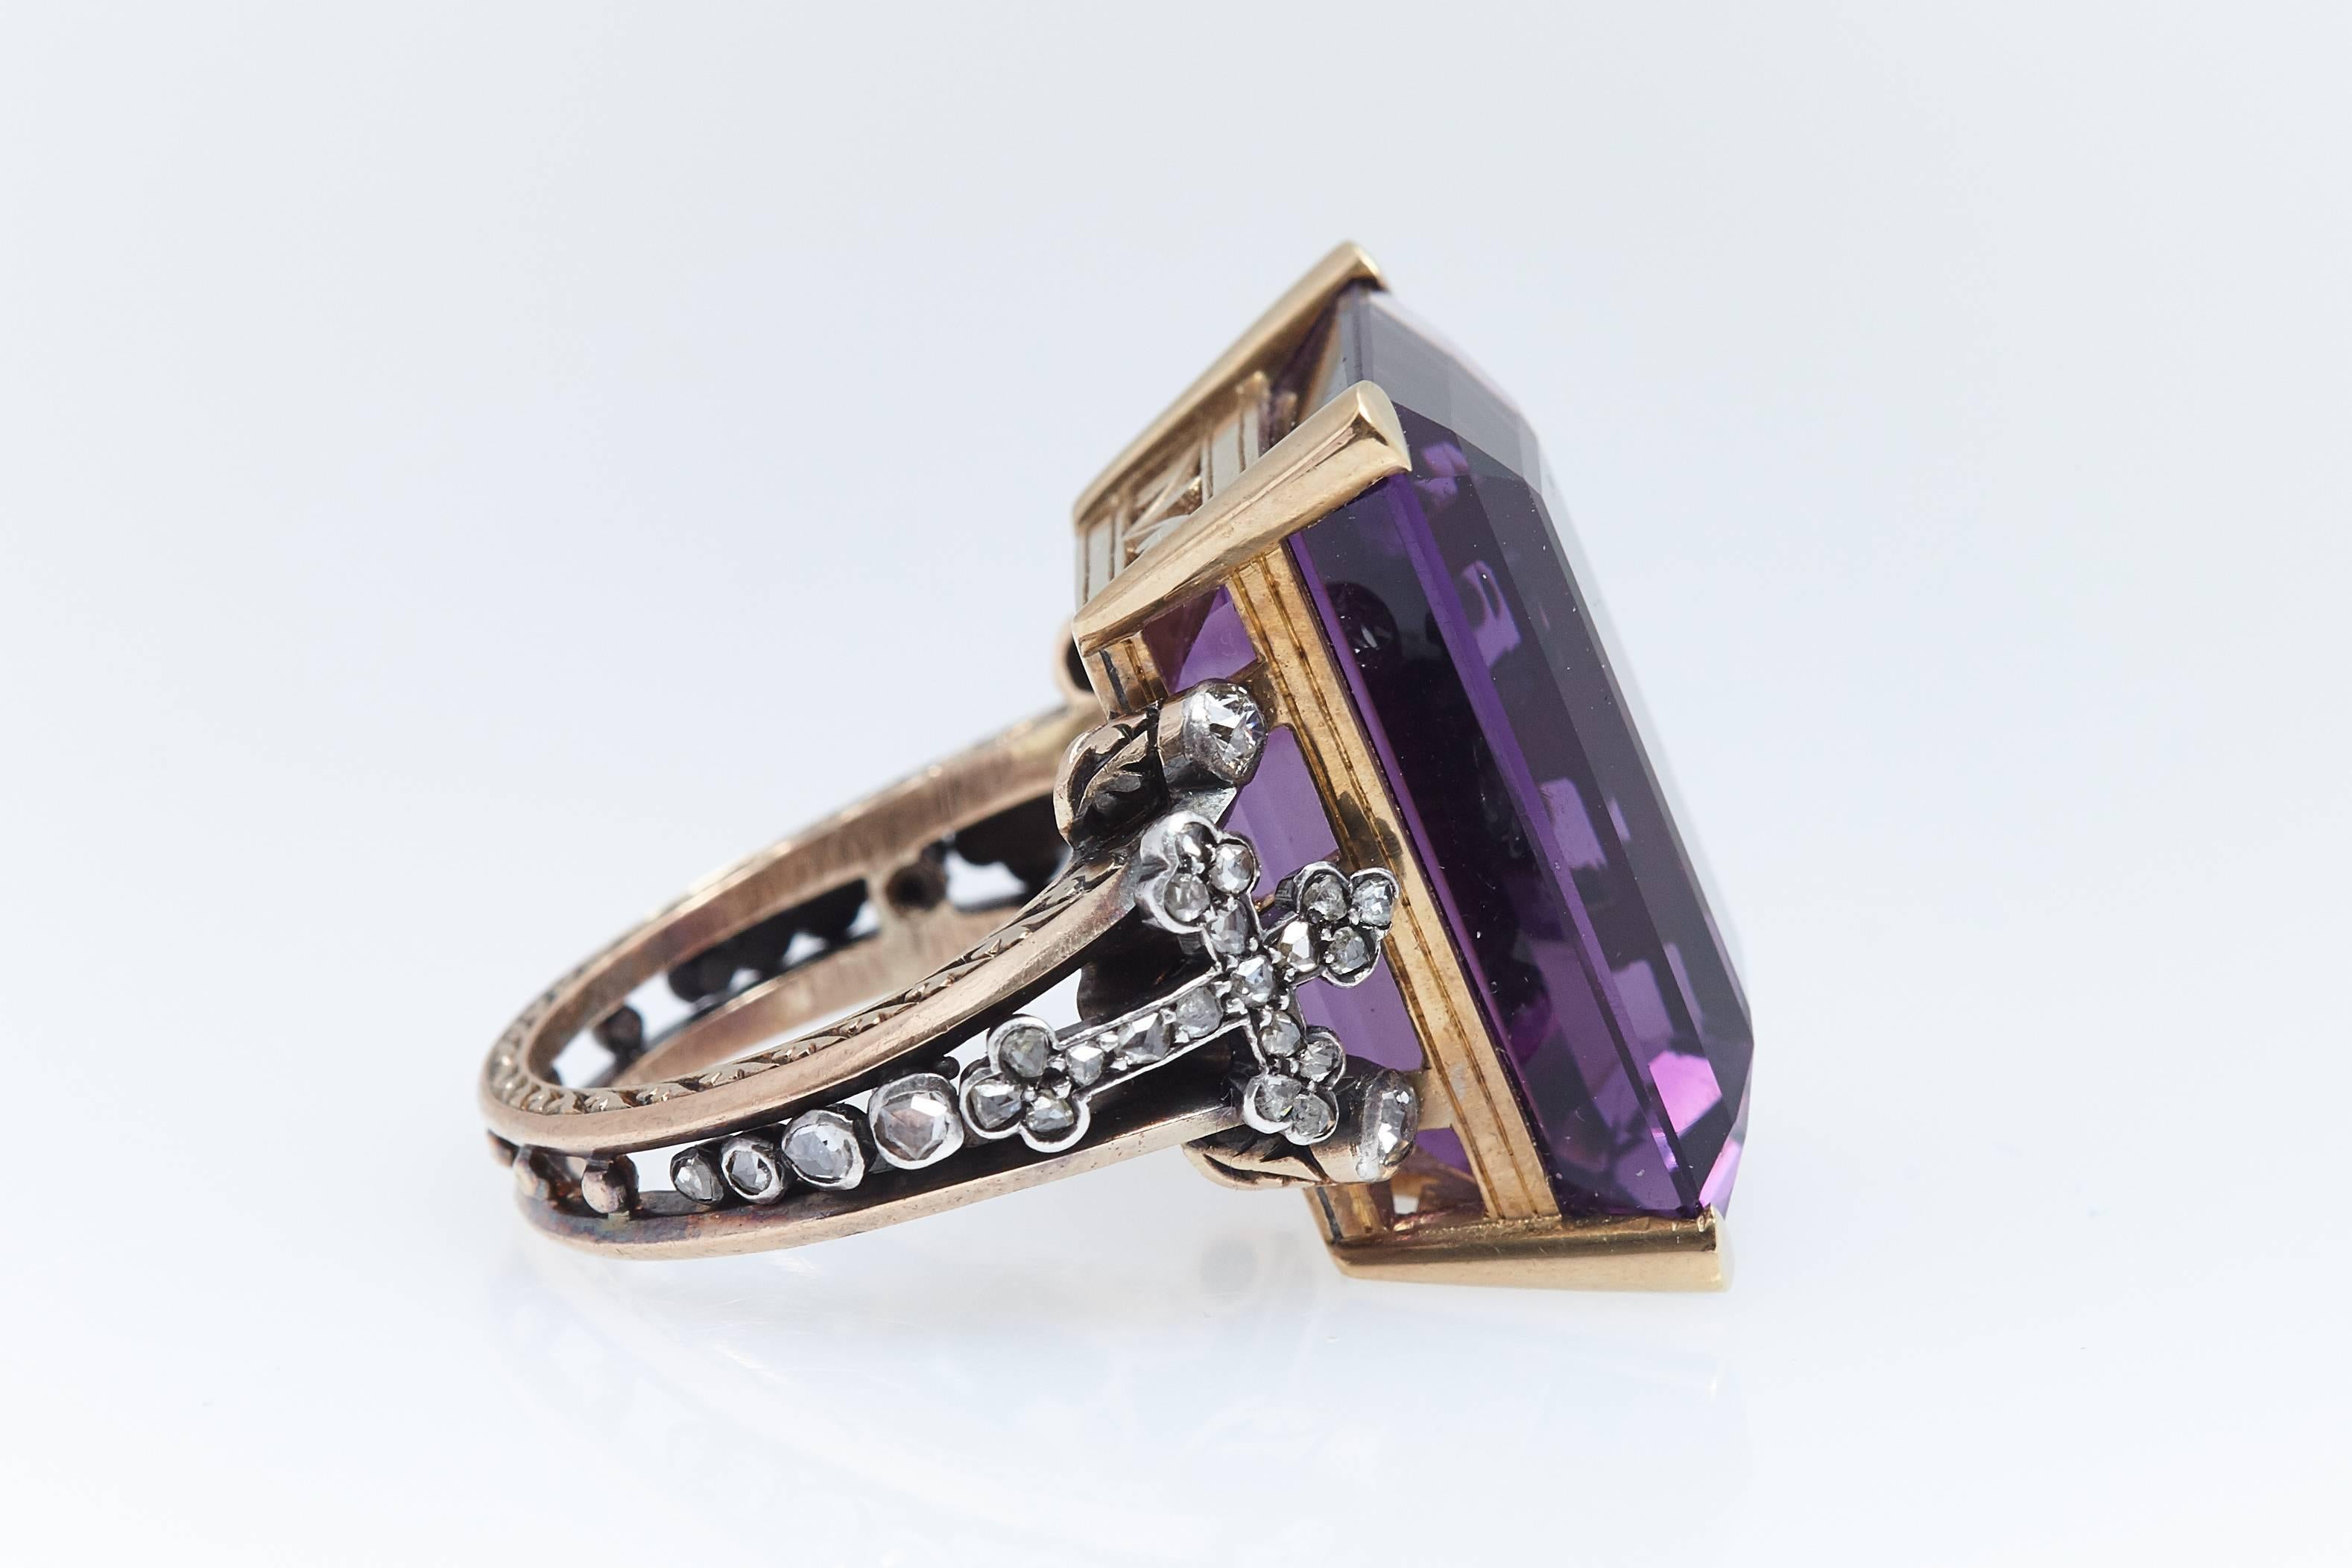     Exquisite designed bishops ring in fourteen karat yellow gold and detailing done in silver.  The amethyst weighs approximately 35 carats. It measures approximately 1 & 1/16 inch in length and 13/16 inch in width. The ring is a size 11 1/4.